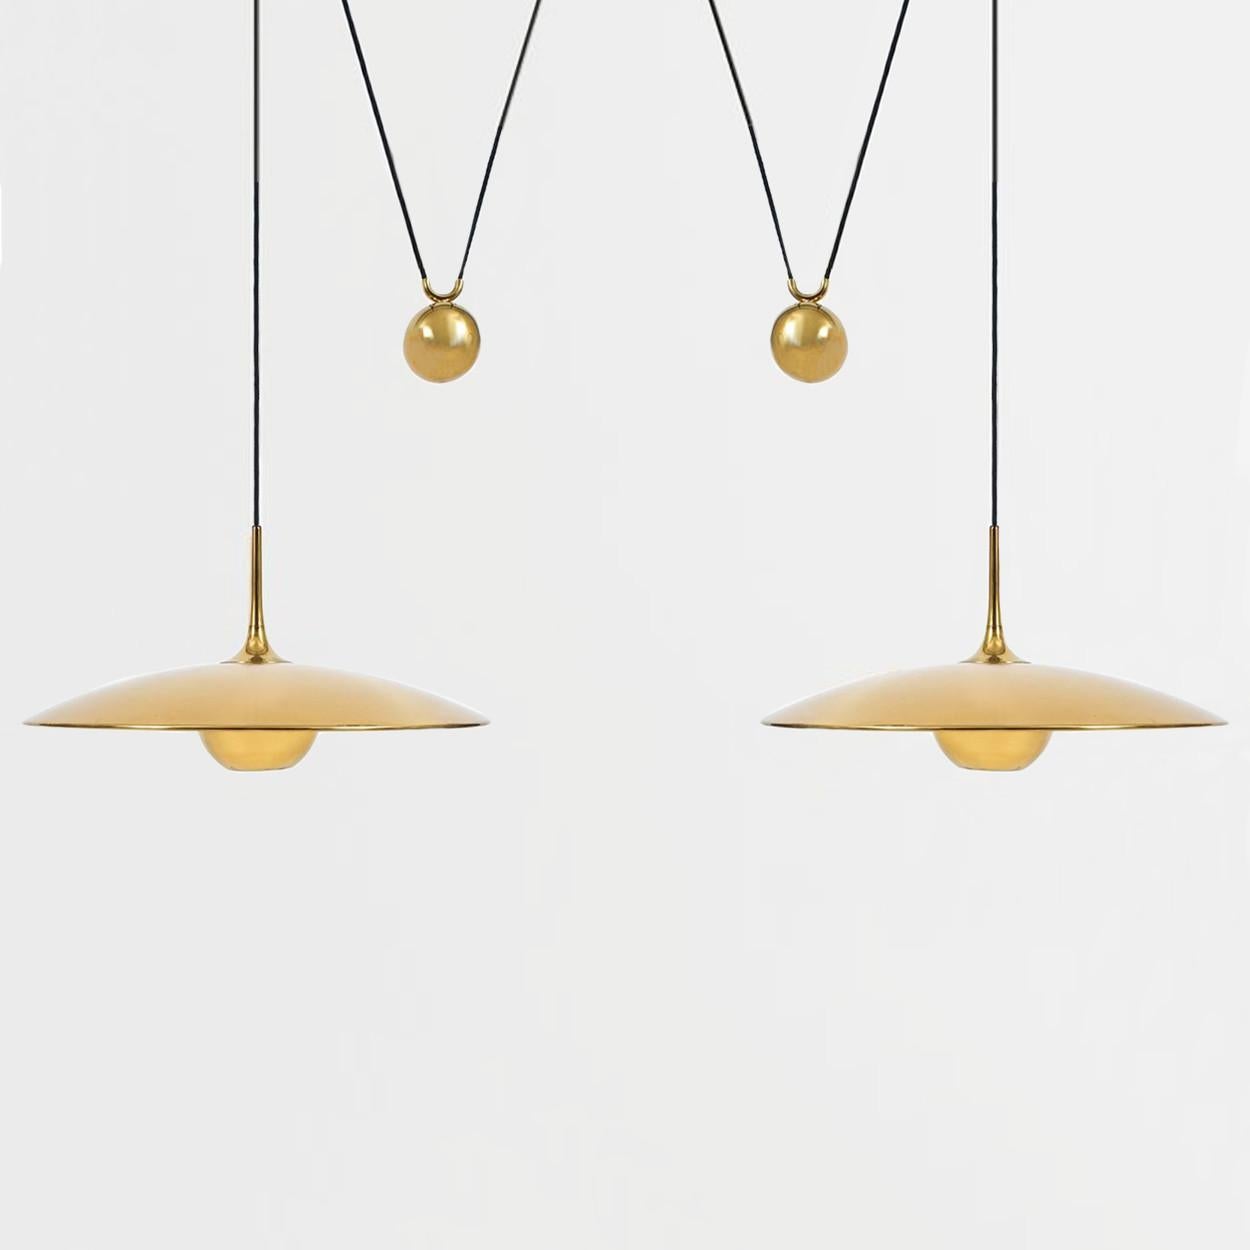 German Onos 55 Double Pull Brass Pendant Lamp by Florian Schulz